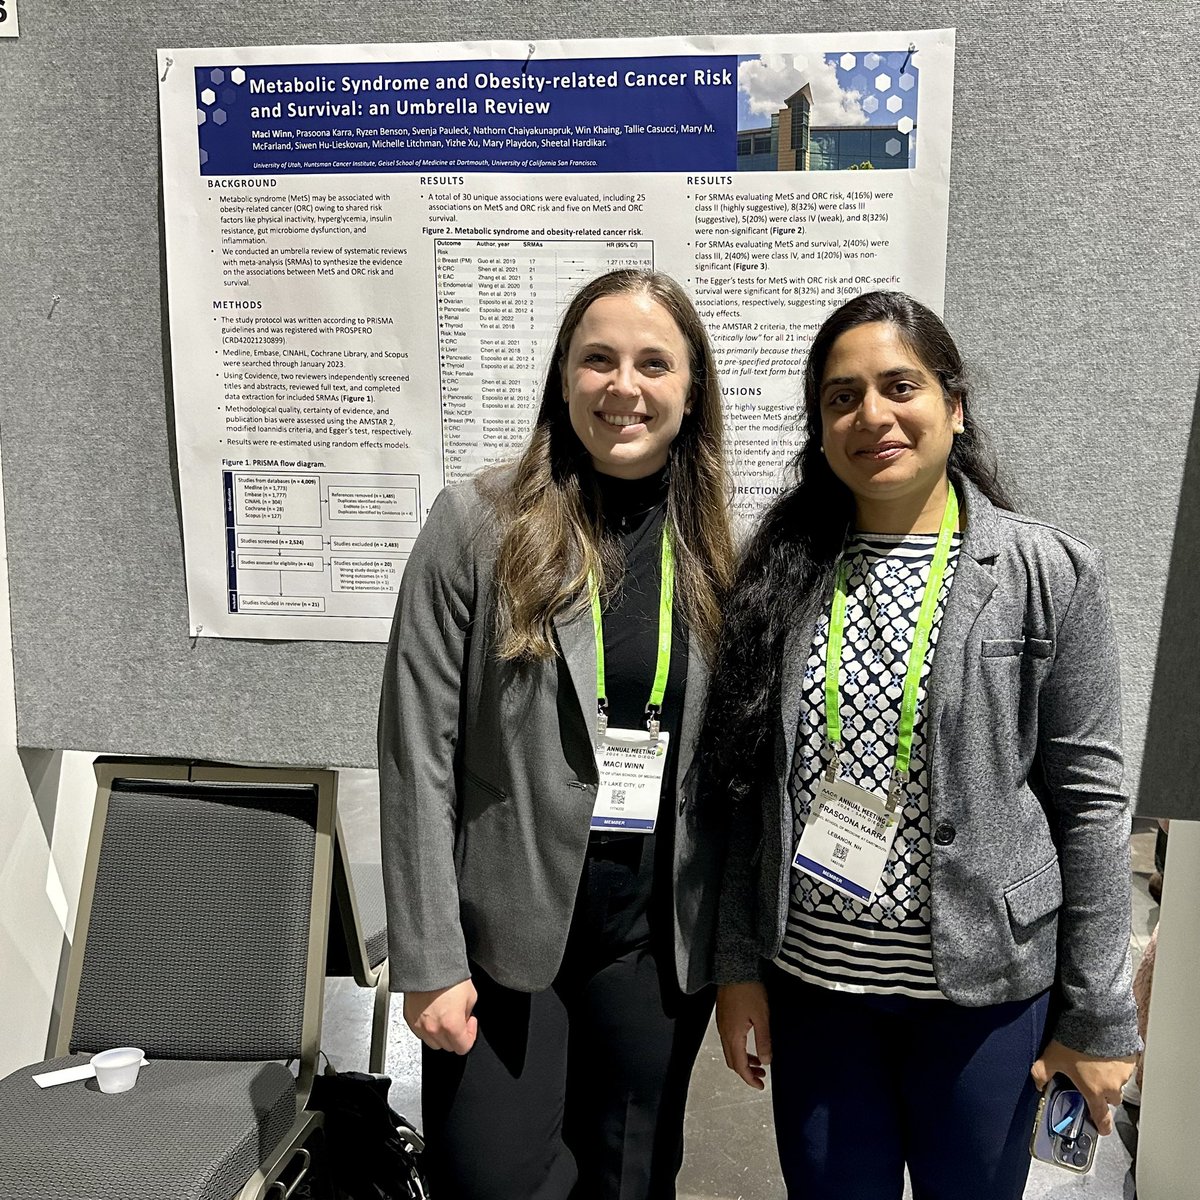 Happy to be @AACR 2024 presenting our latest research on metabolic syndrome and obesity-related cancer risk and survival! #AACR2024 #Obesity #Cancer #MetabolicSyndrome #UmbrellaReview @PrasoonaKarra